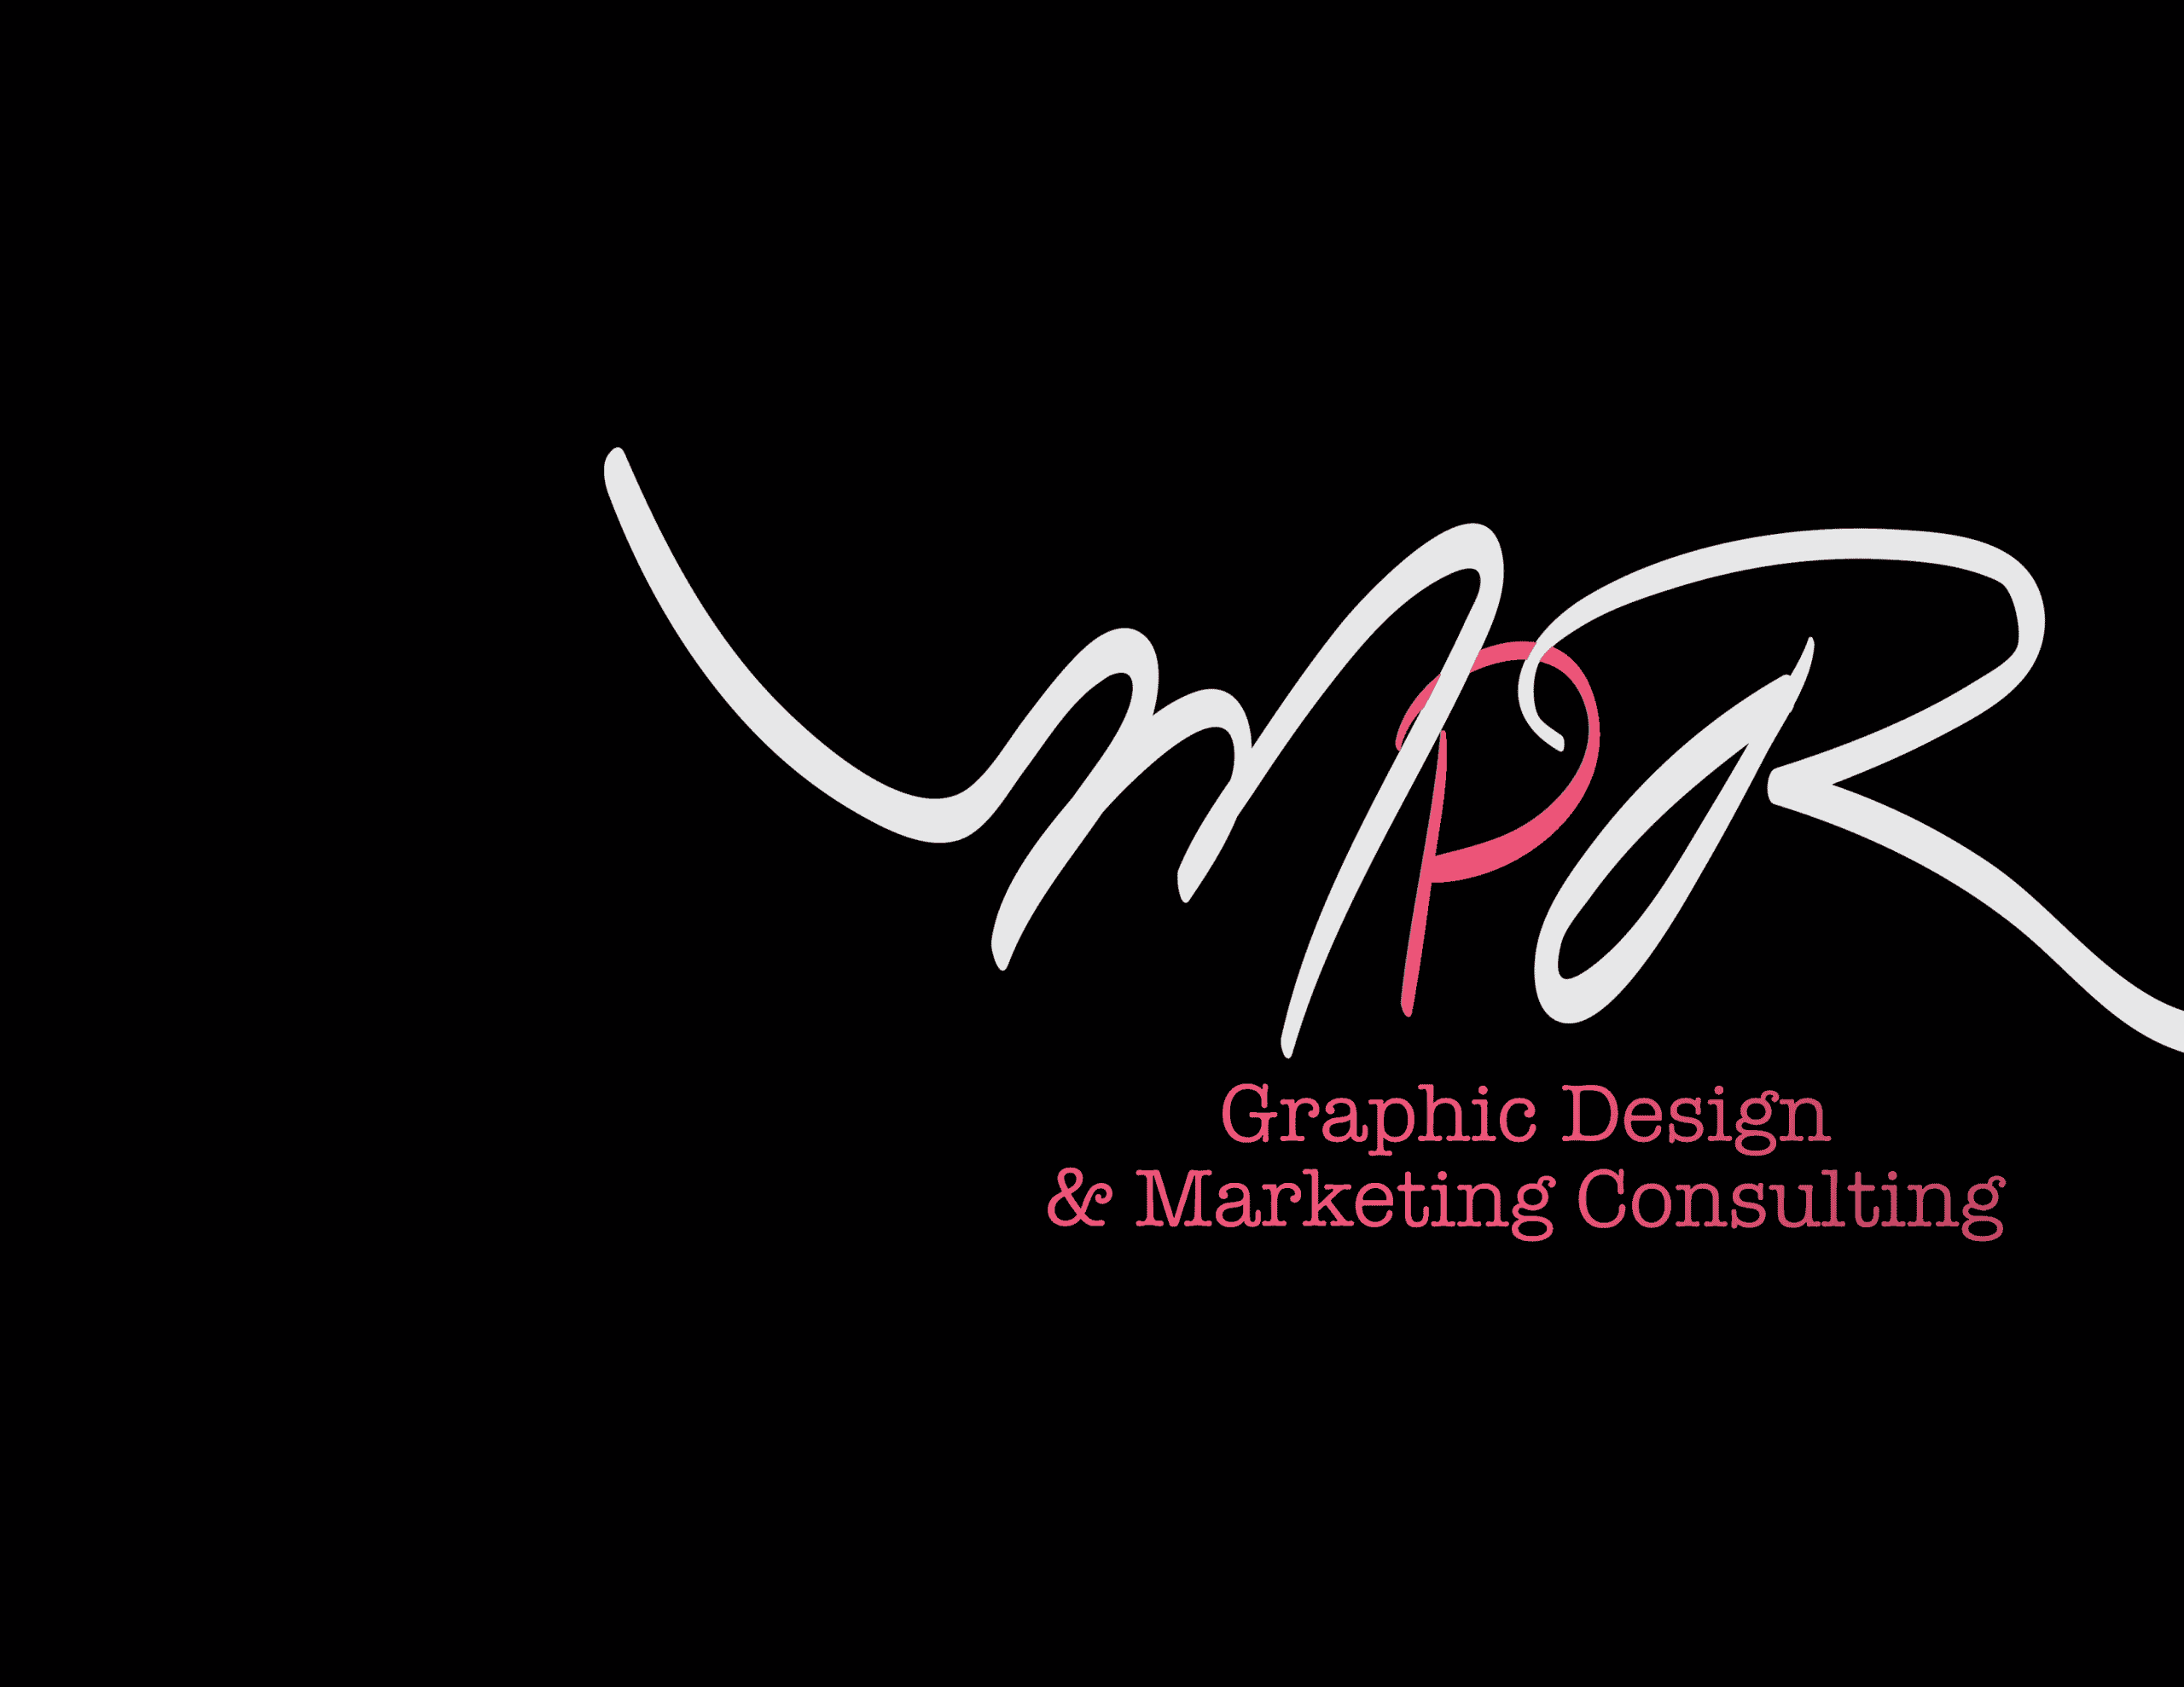 Marketing and Graphic Design Experience